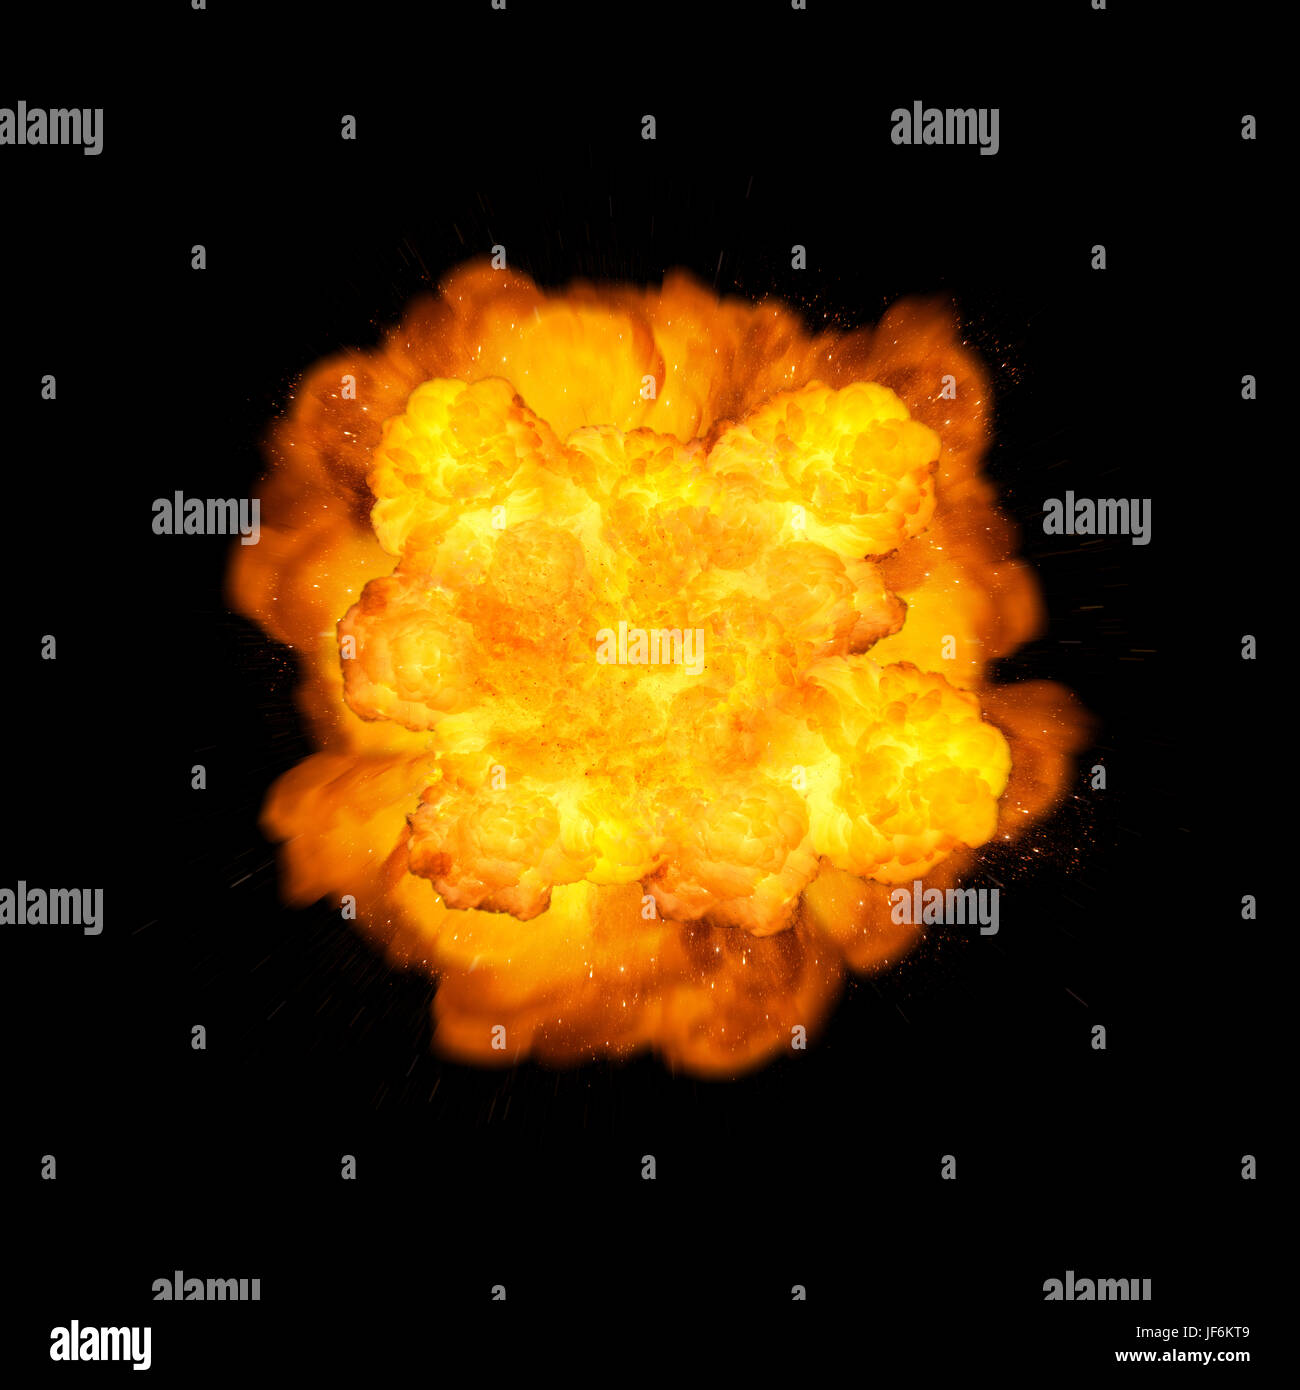 Extremely massive fire explosion, orange color with sparks isolated on black background, high resolution picture Stock Photo